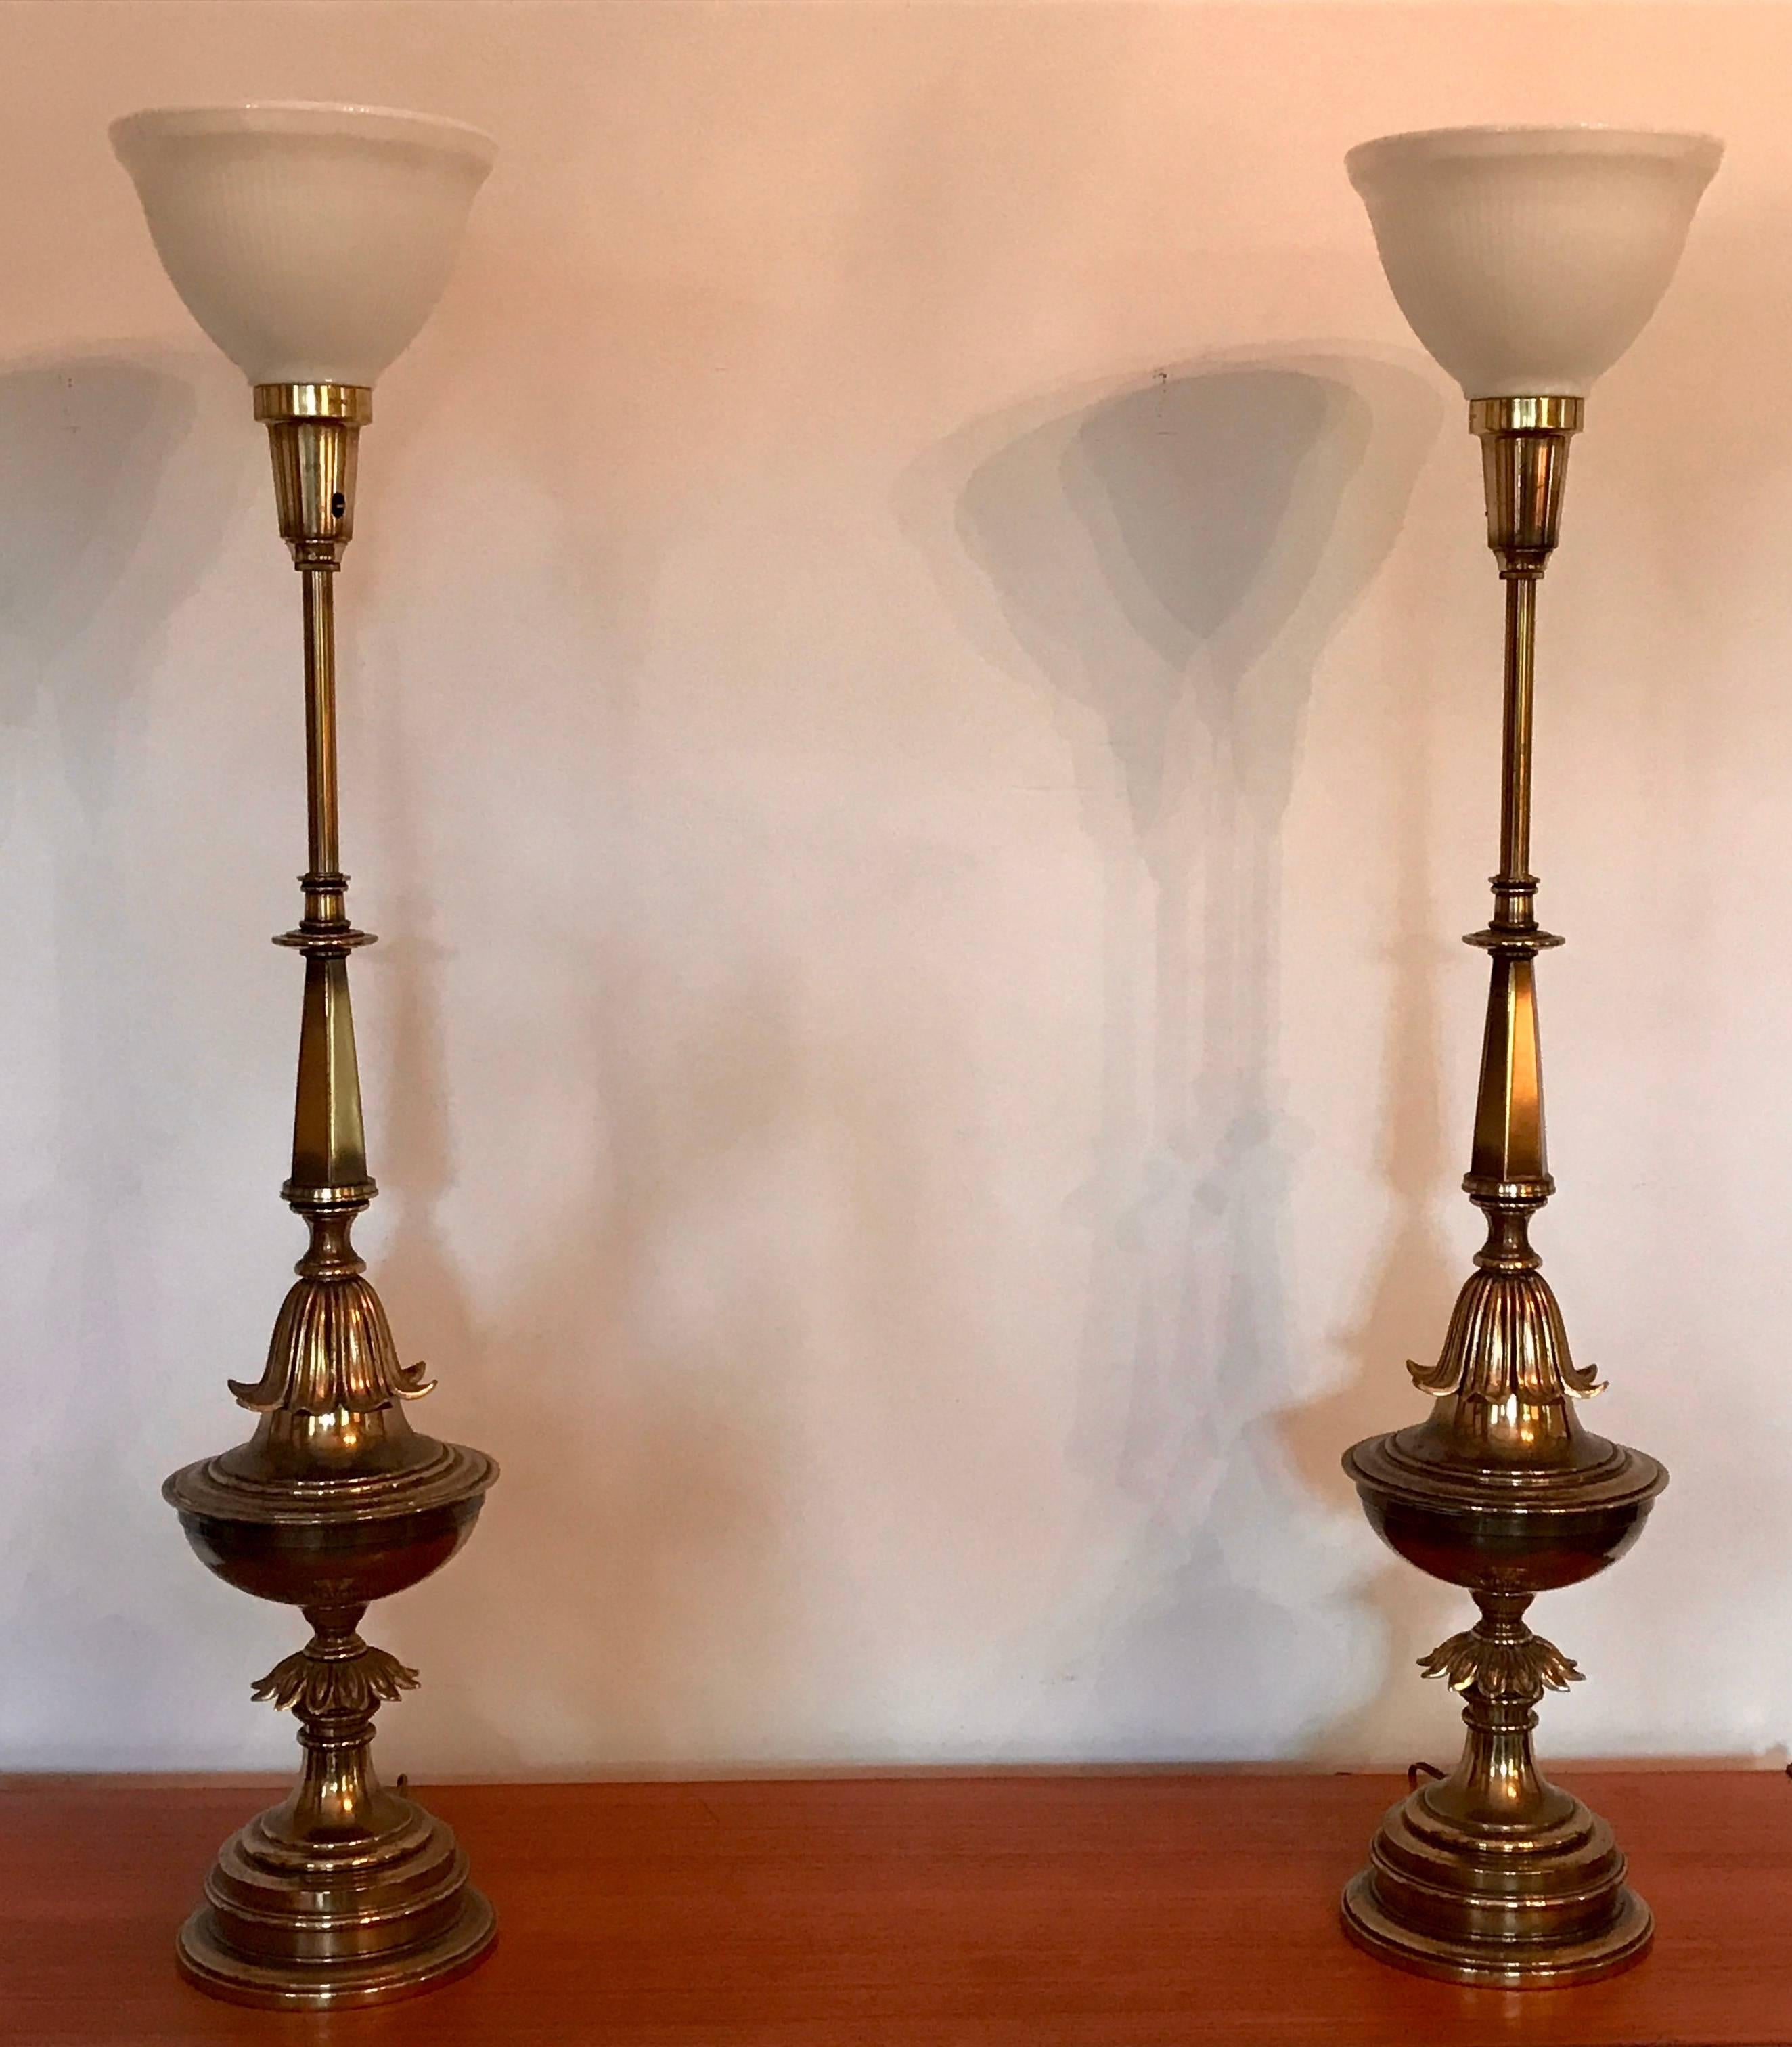 American Pair of Hollywood Regency Style Brass Table Lamps, Large Scale, 1940's For Sale